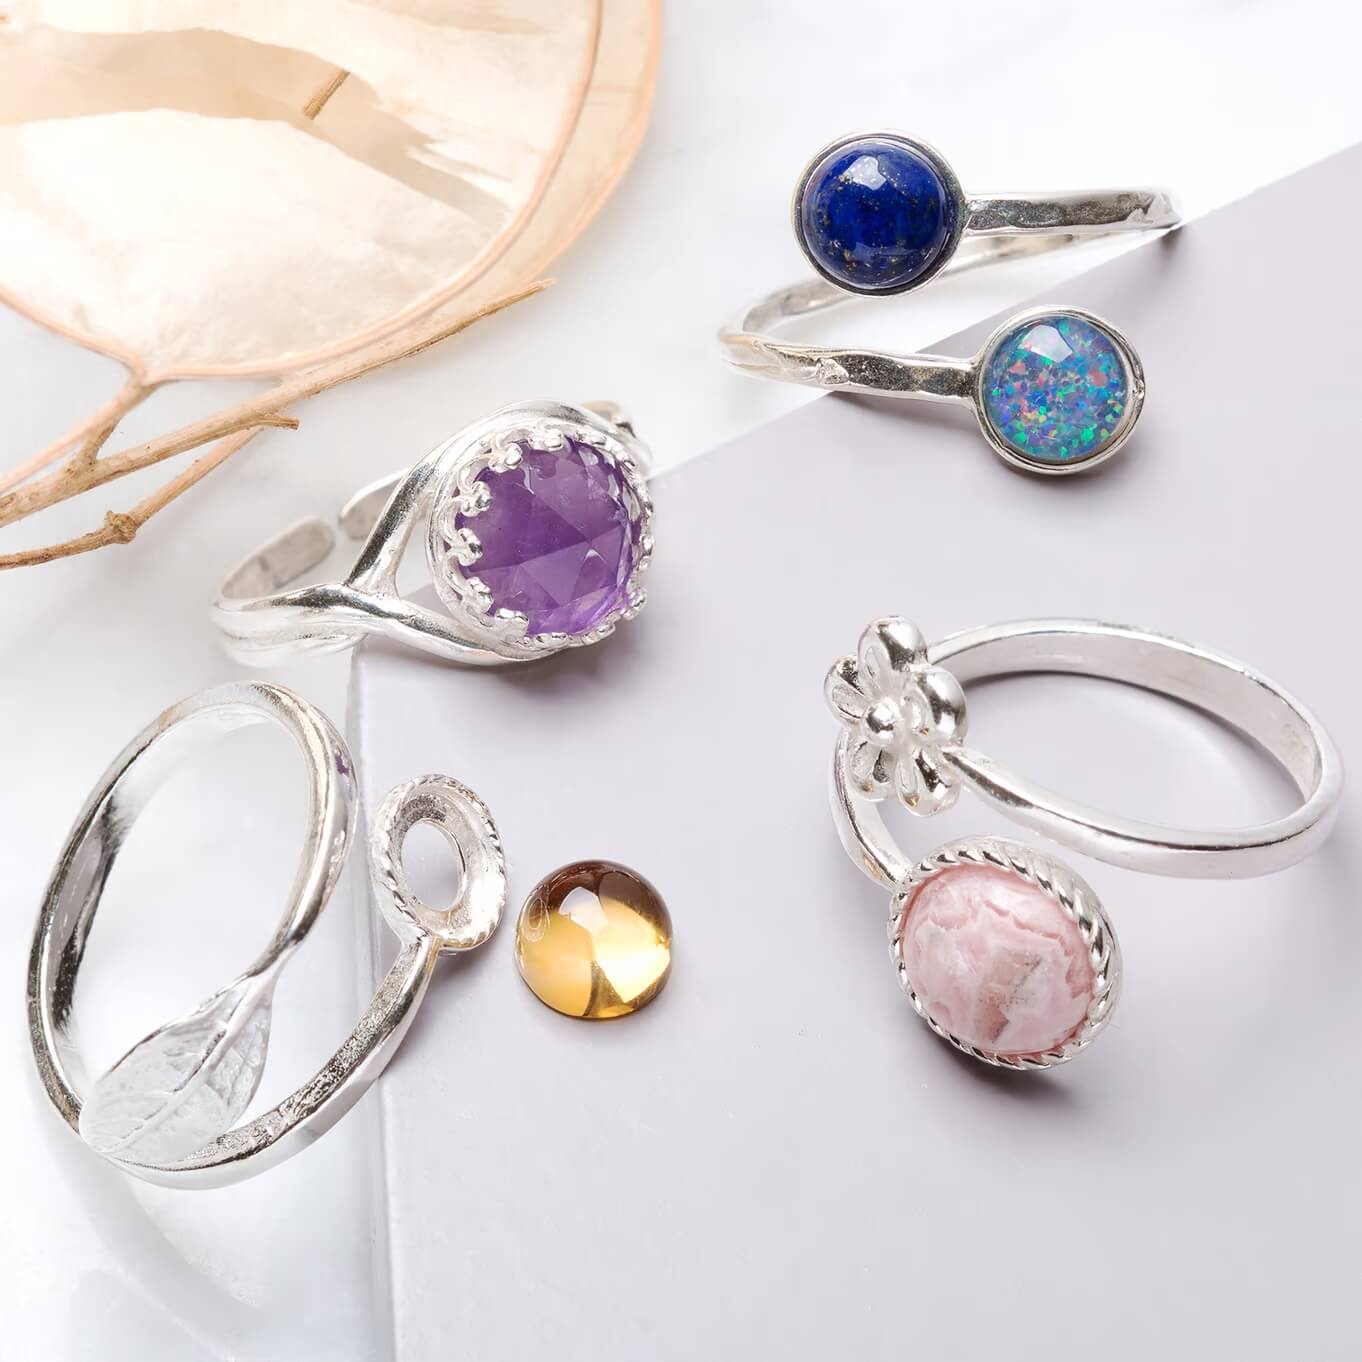 Overview of Gemstone Rings